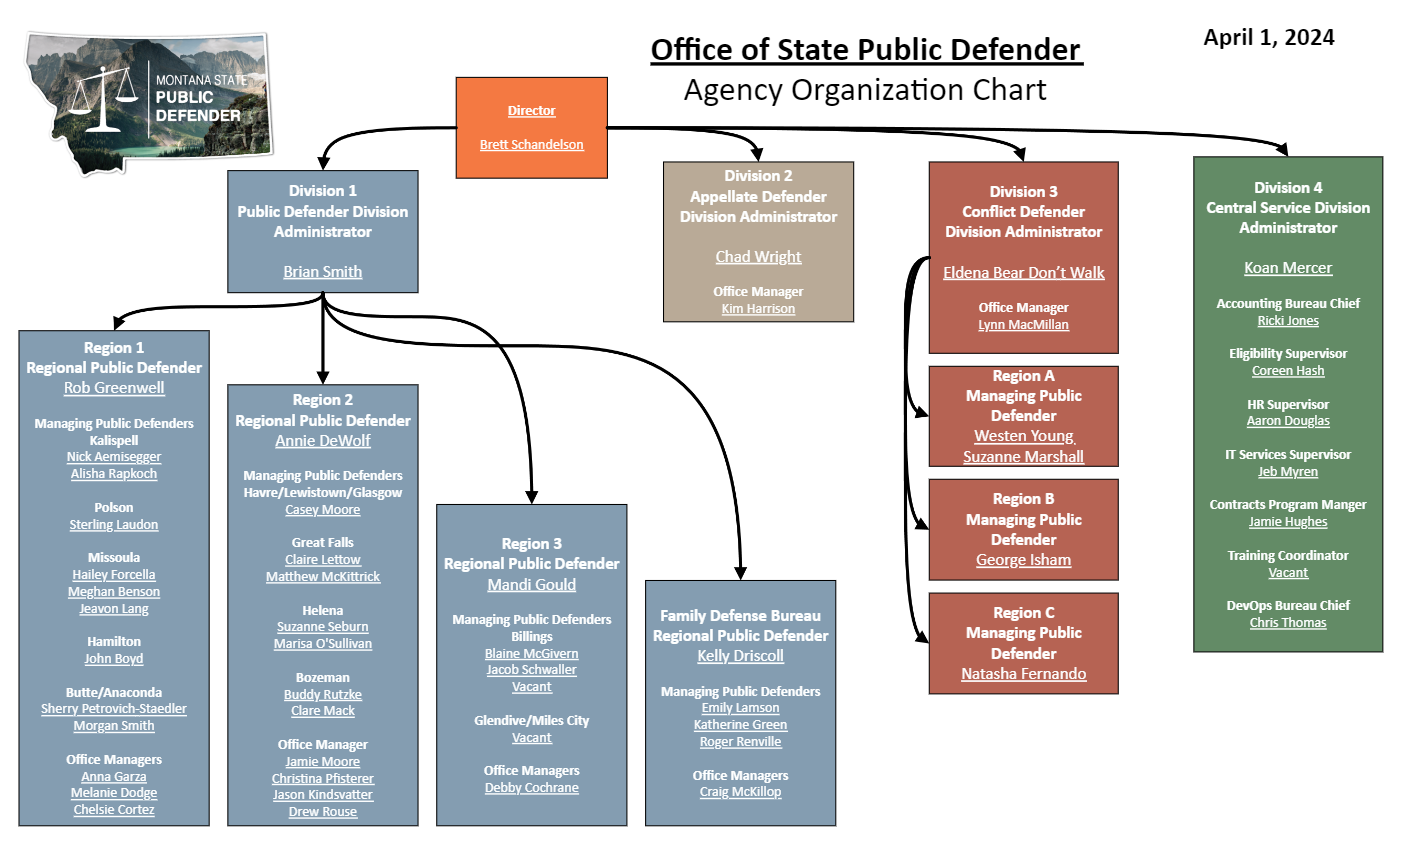 OPD-Org-Chart-Apr2024.png